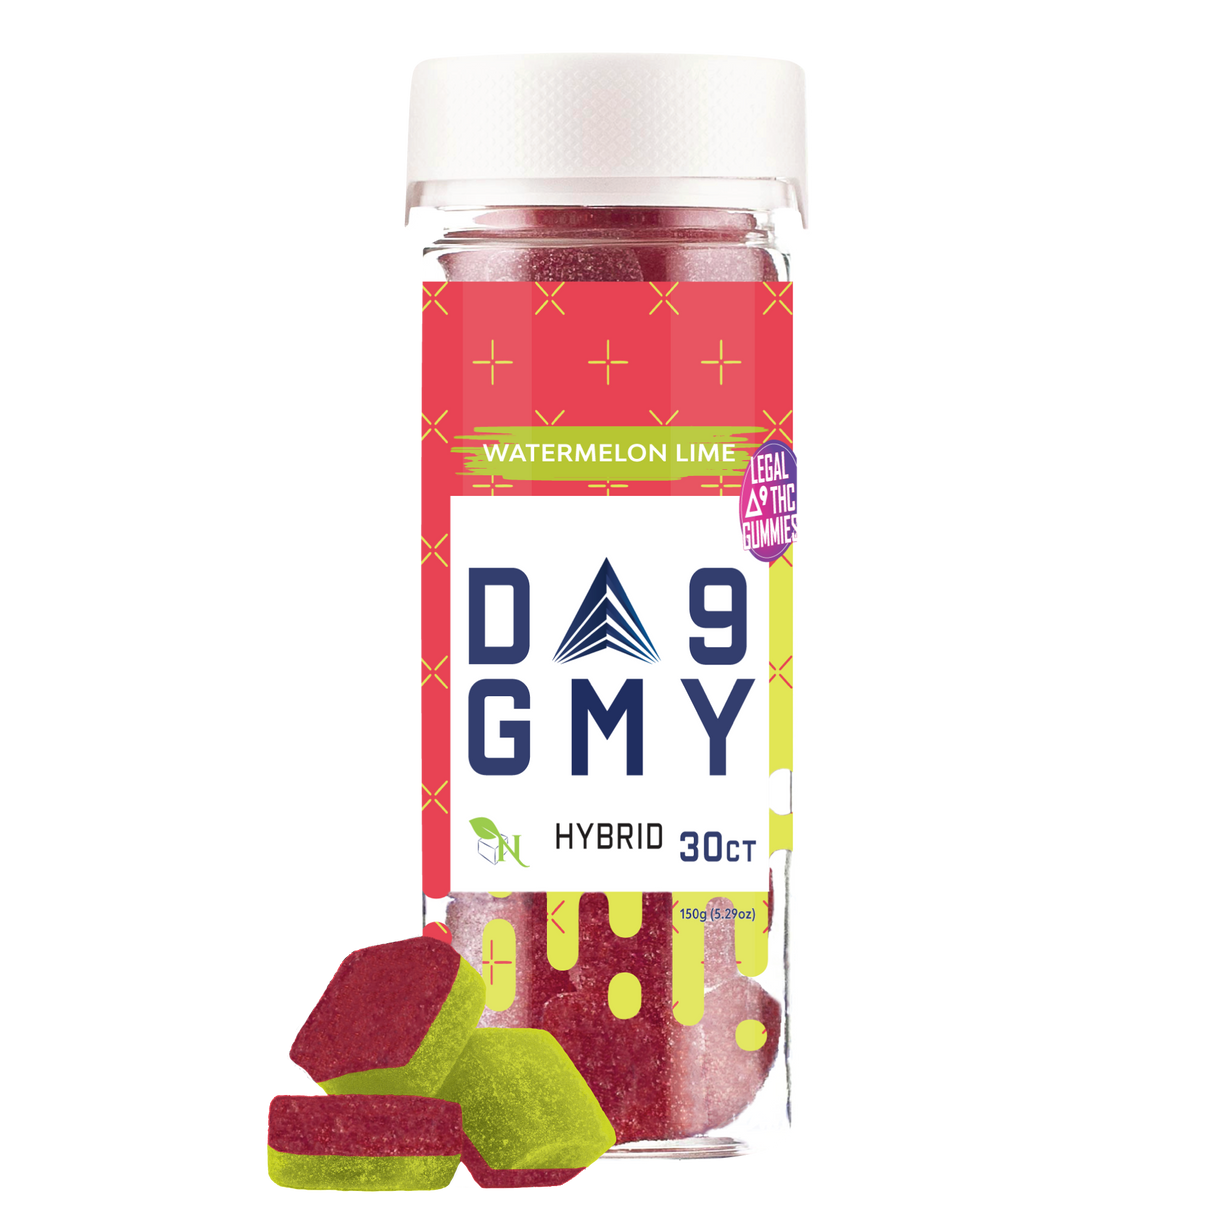 A Gift From Nature Delta-9 Hybrid Gummy Jar: Watermelon Lime